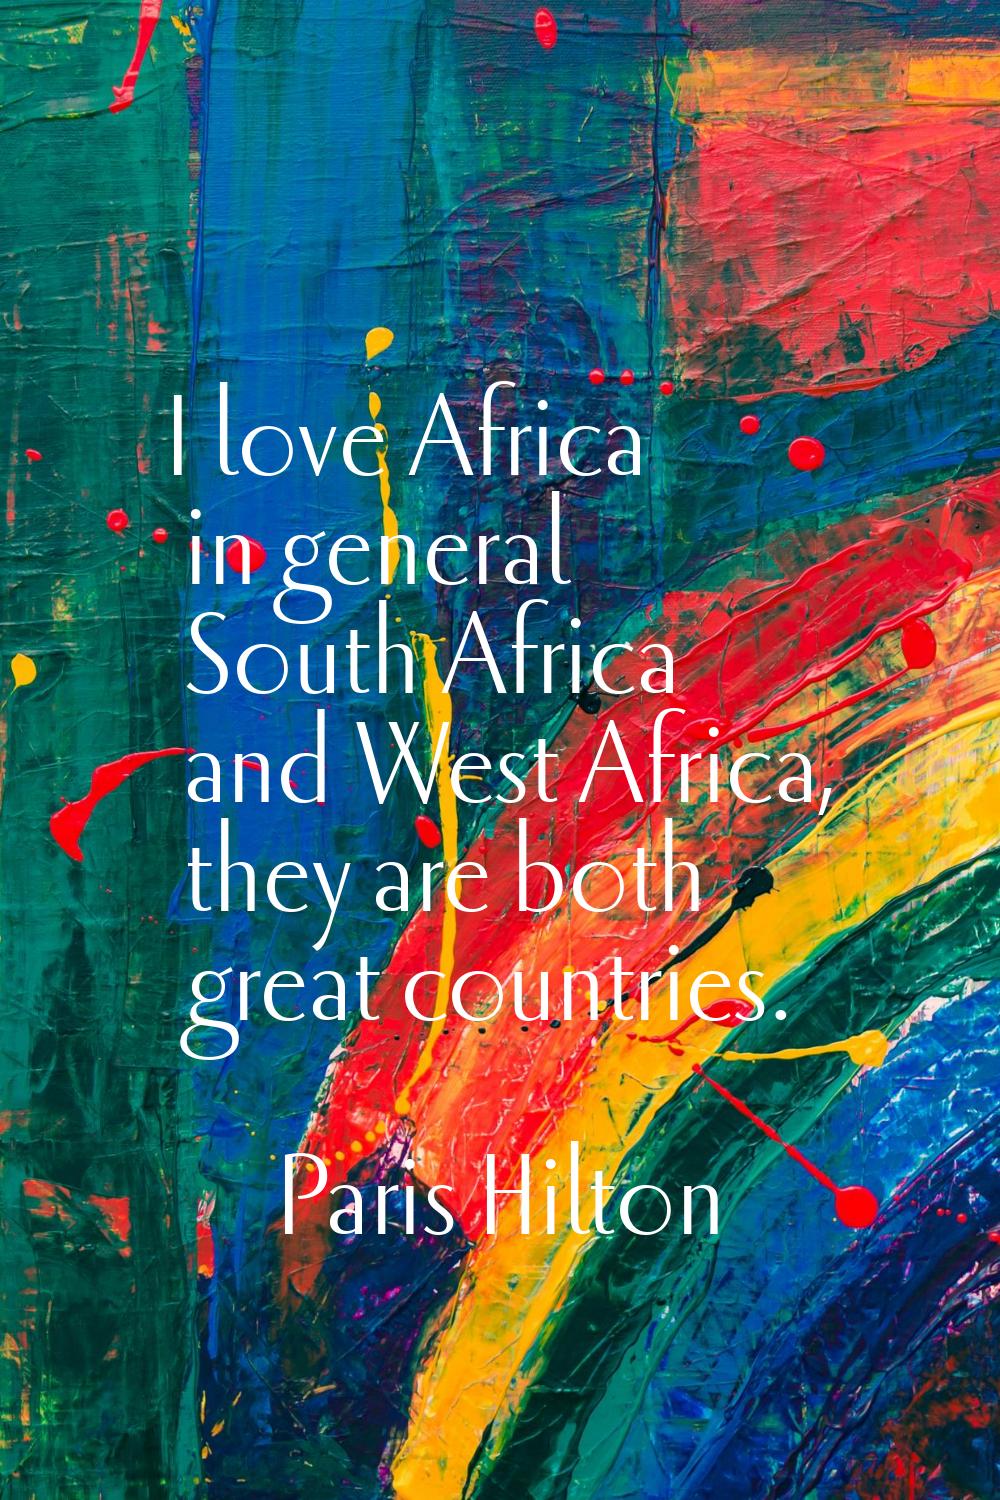 I love Africa in general South Africa and West Africa, they are both great countries.